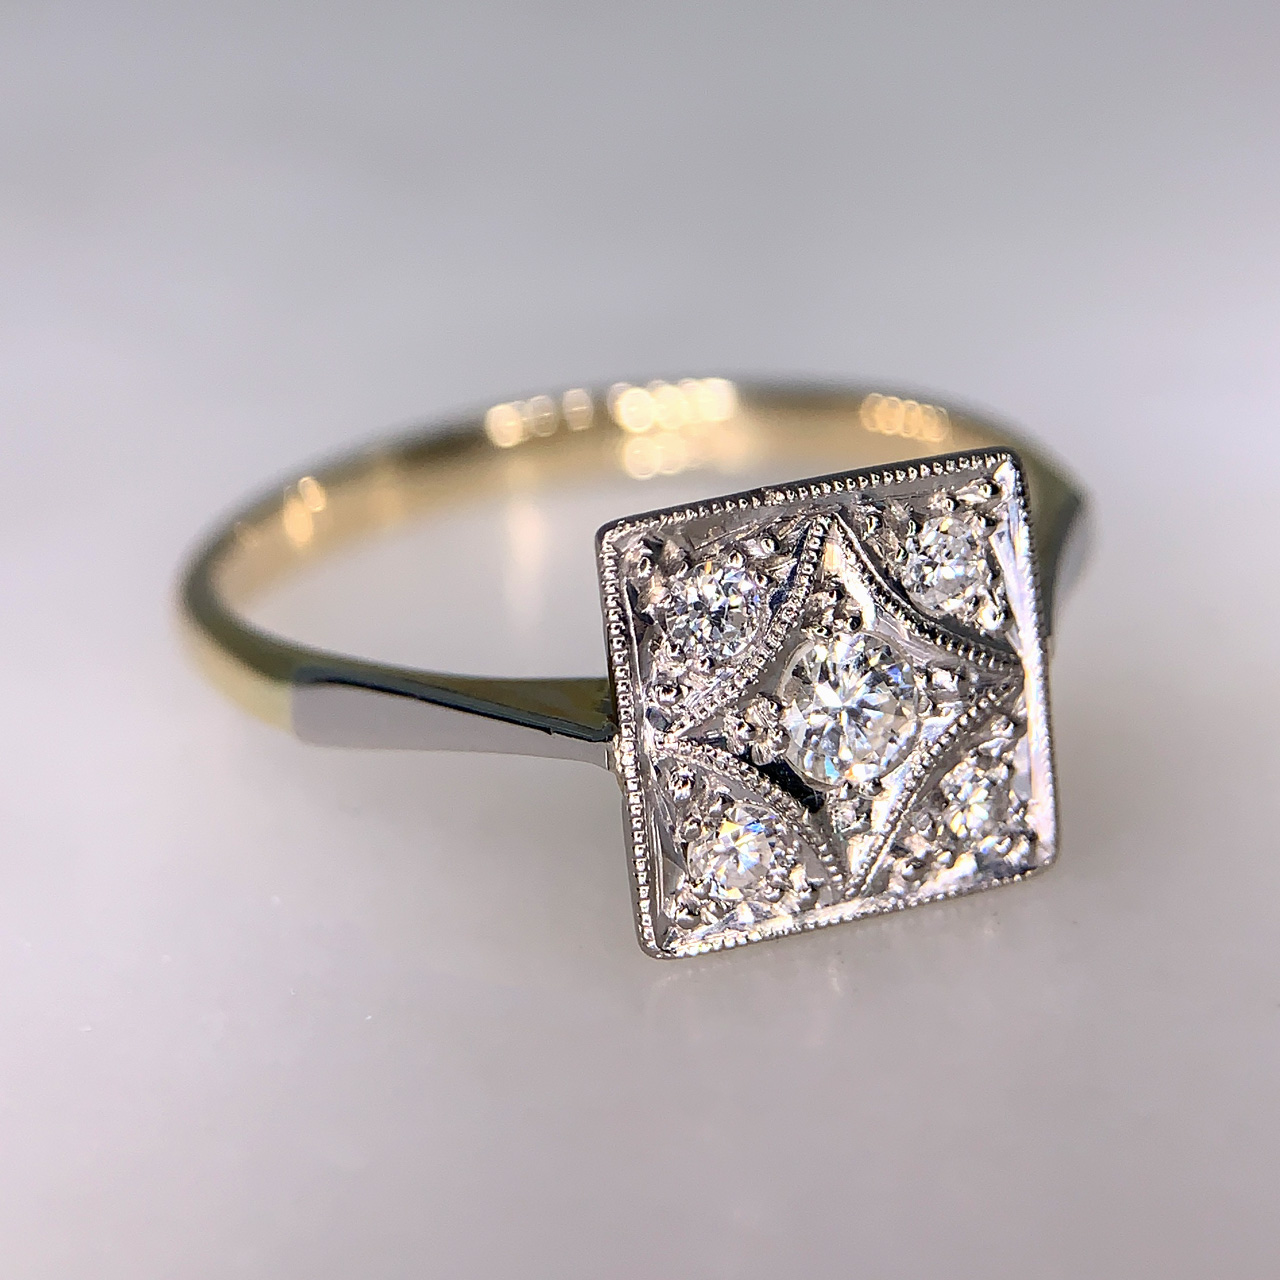 Square Plaque Diamond Platinum and Gold Deco Ring, stamped 18ct in a yellow gold shank. 5 Platinum set diamonds, with platinum shoulders.